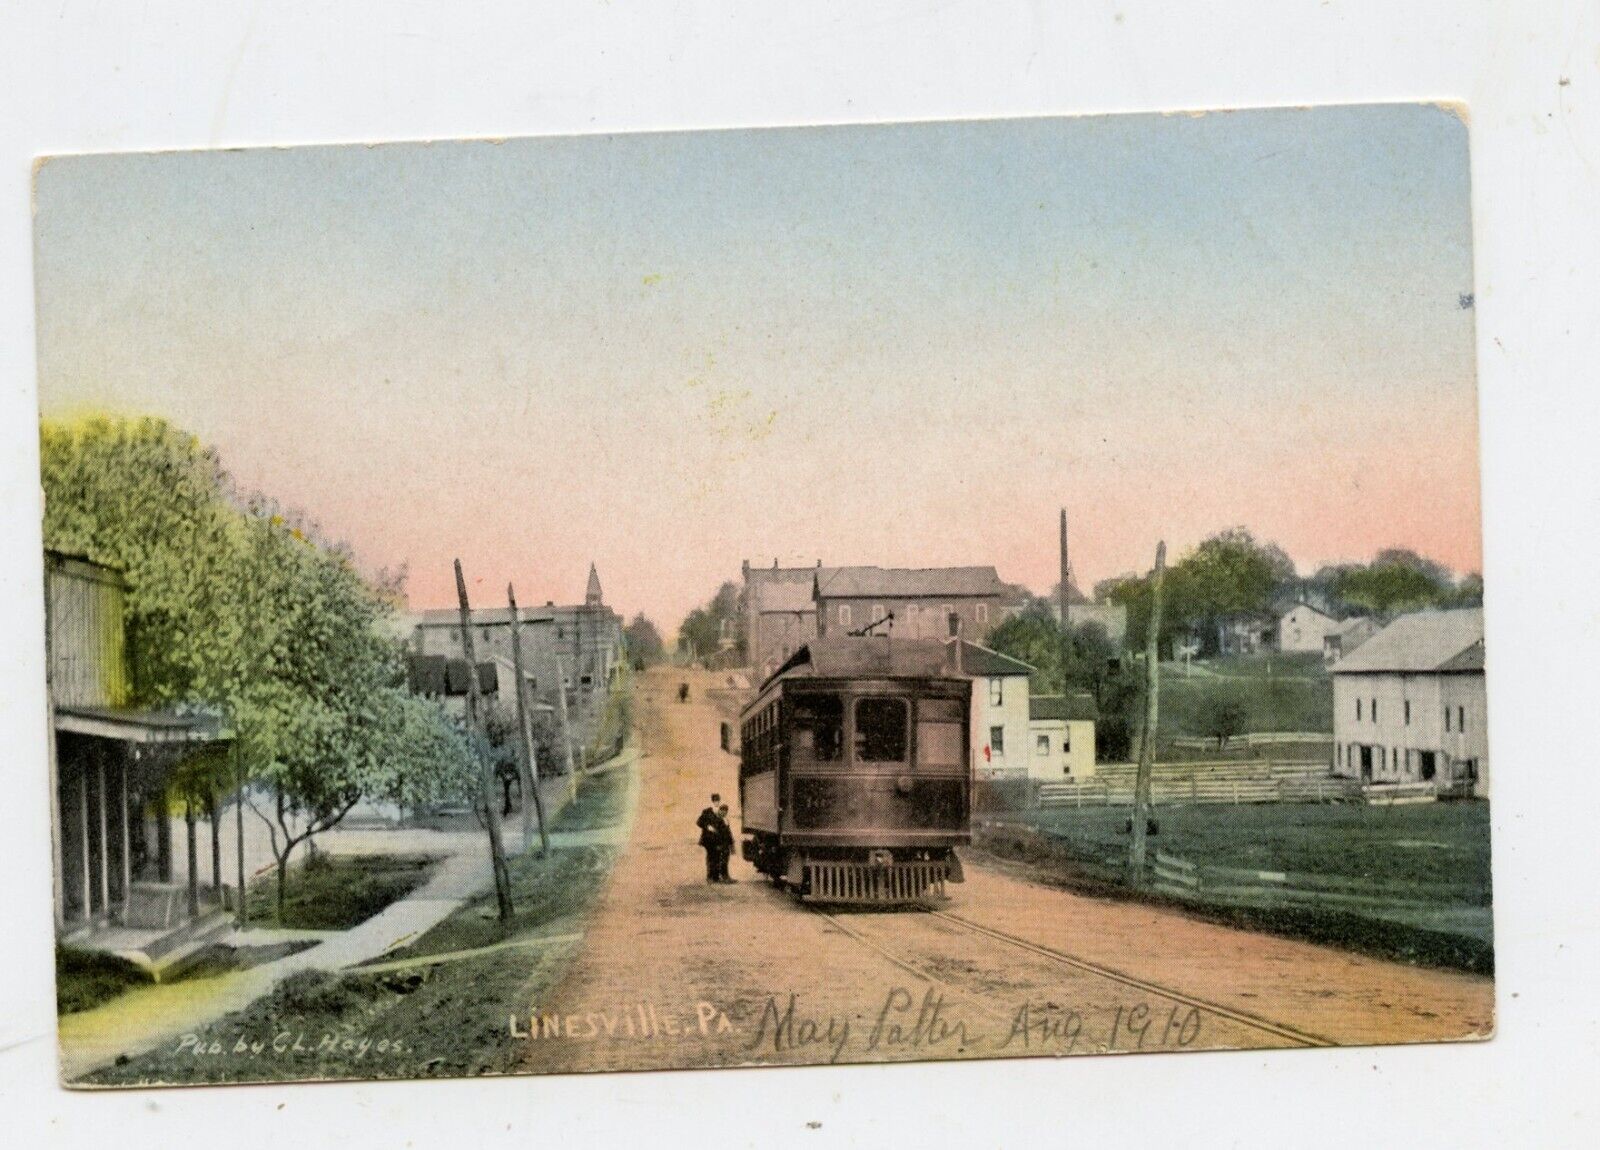 1910 Vintage Postcard - Linesville, Pennsylvania - Hayes / with 1 Cent stamp